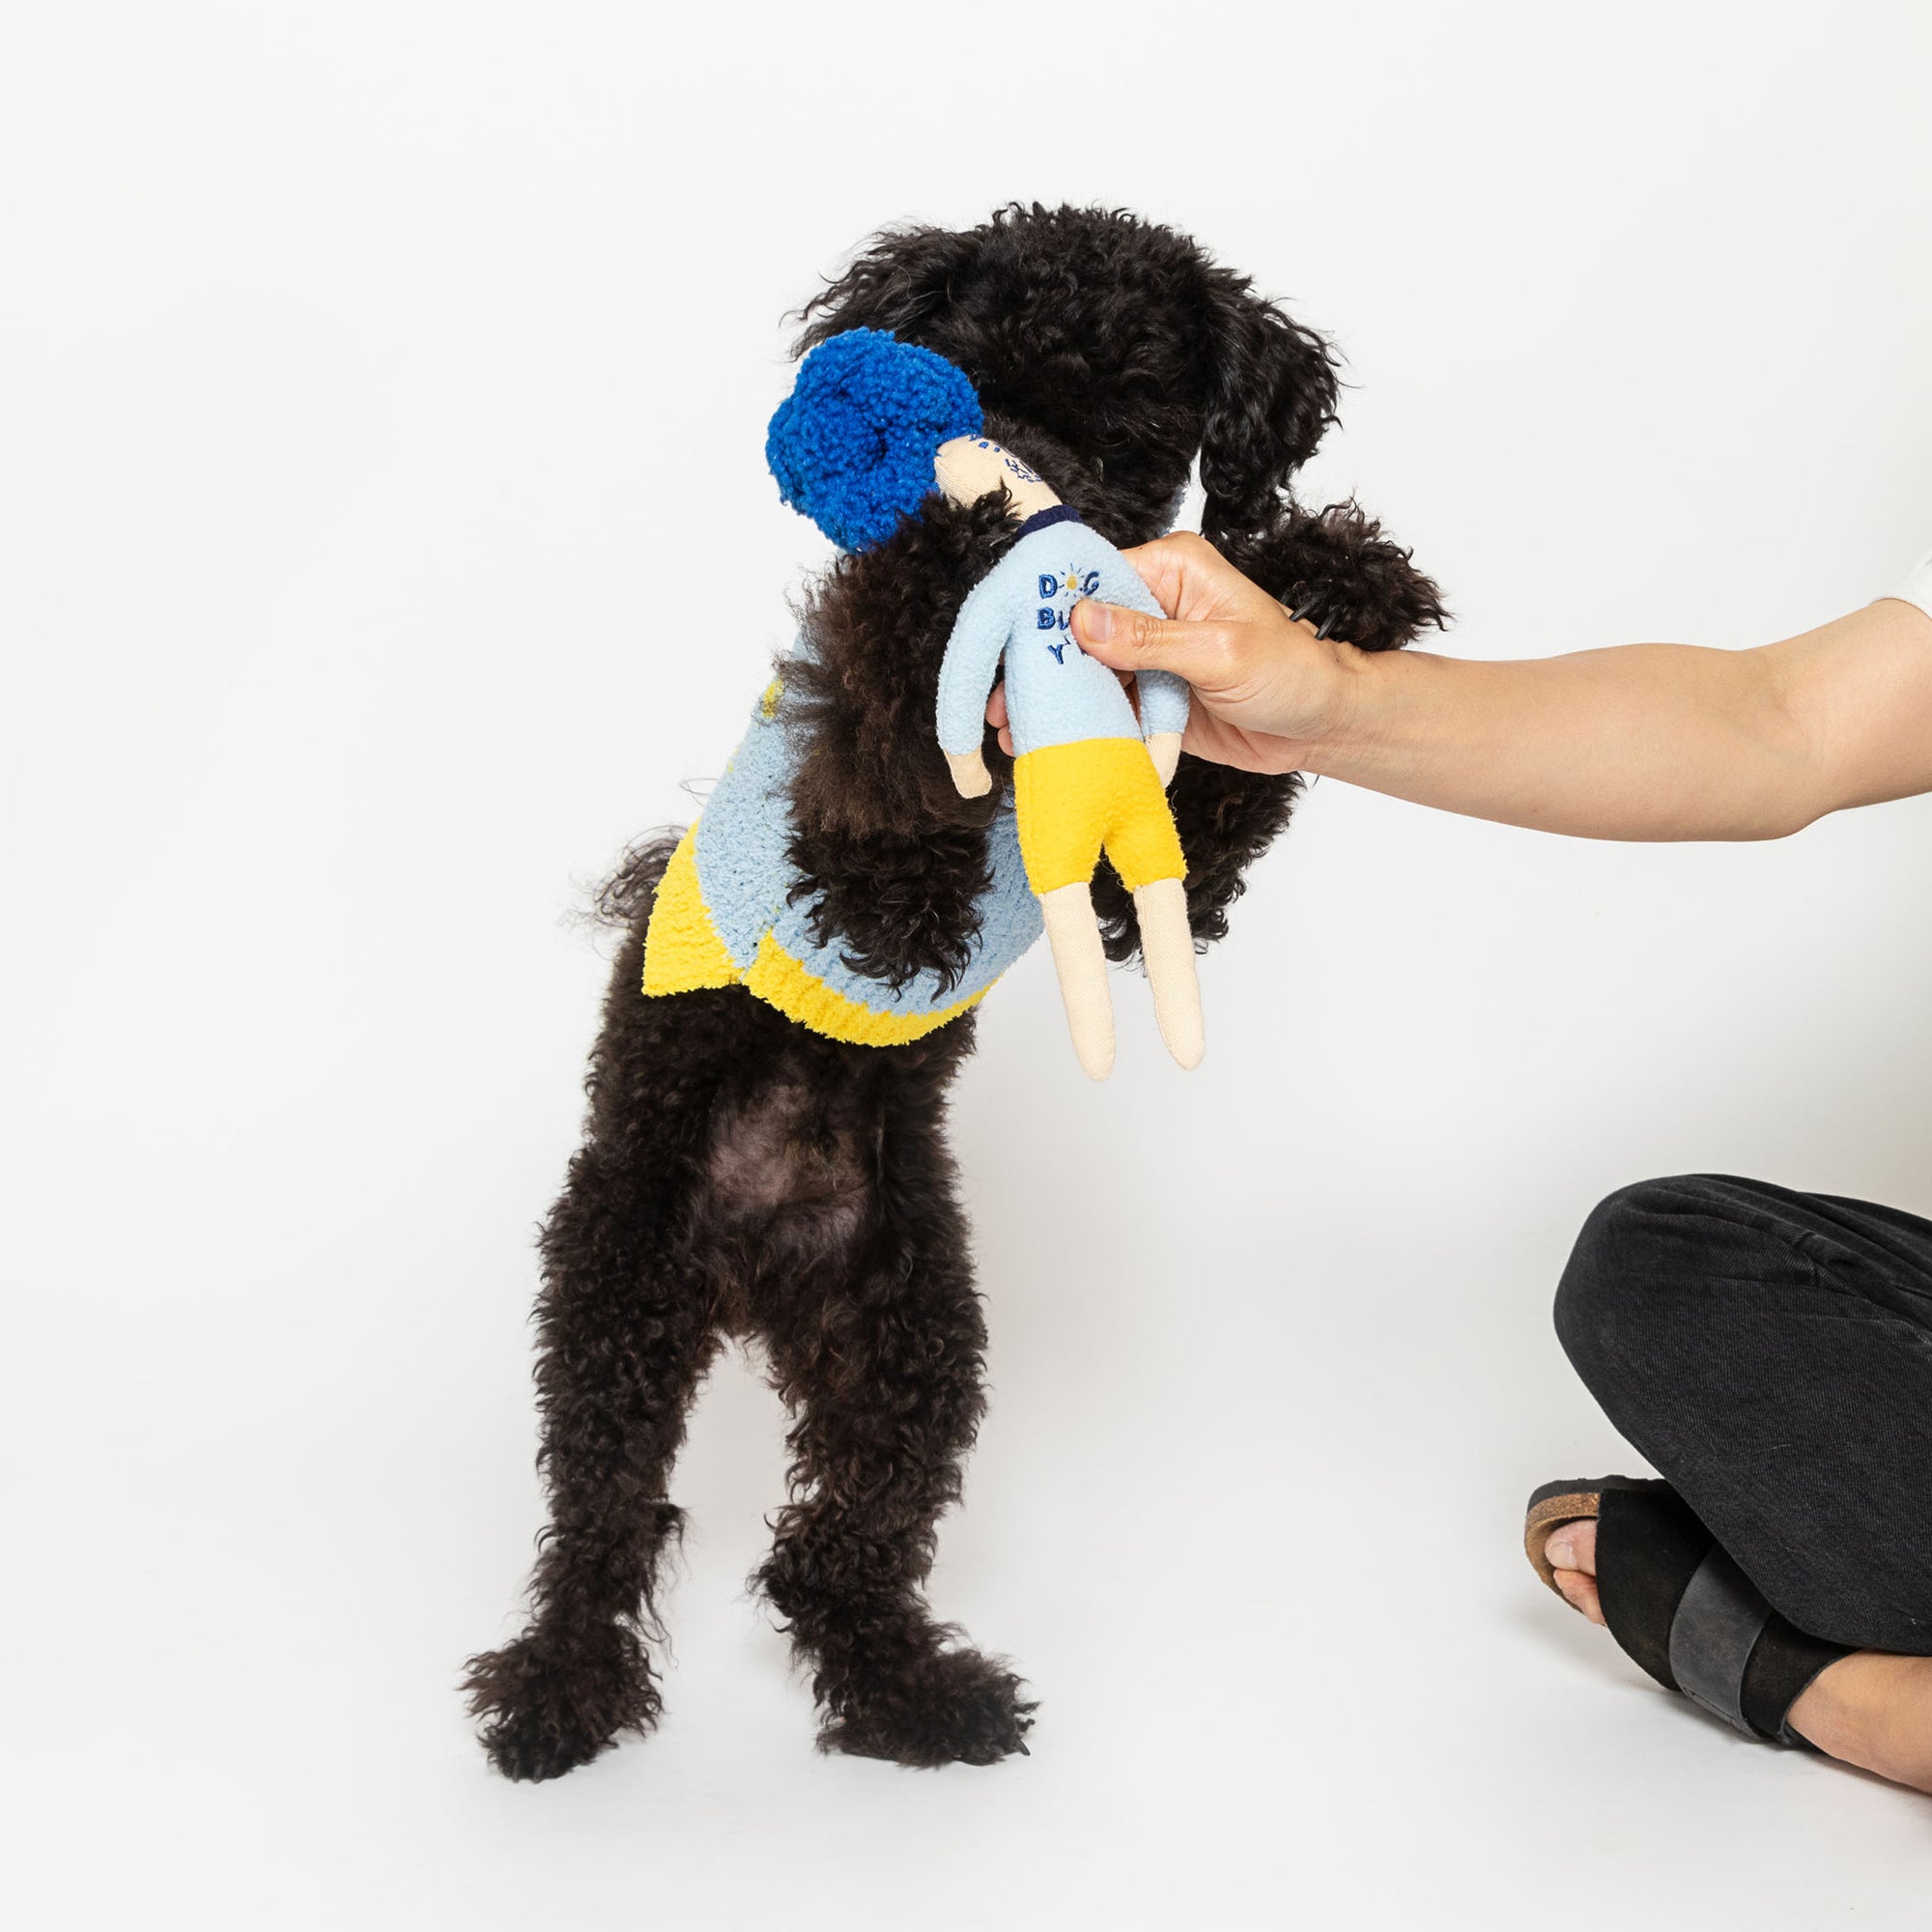 In the photo, a black curly-haired dog is standing on its hind legs, interacting with a blue-haired, doll-shaped nosework toy that a person is holding in front of it. The dog is wearing a blue and yellow sweater, and its playful stance against the white background highlights its engagement with the toy, which is designed to provide mental stimulation and play for pets.